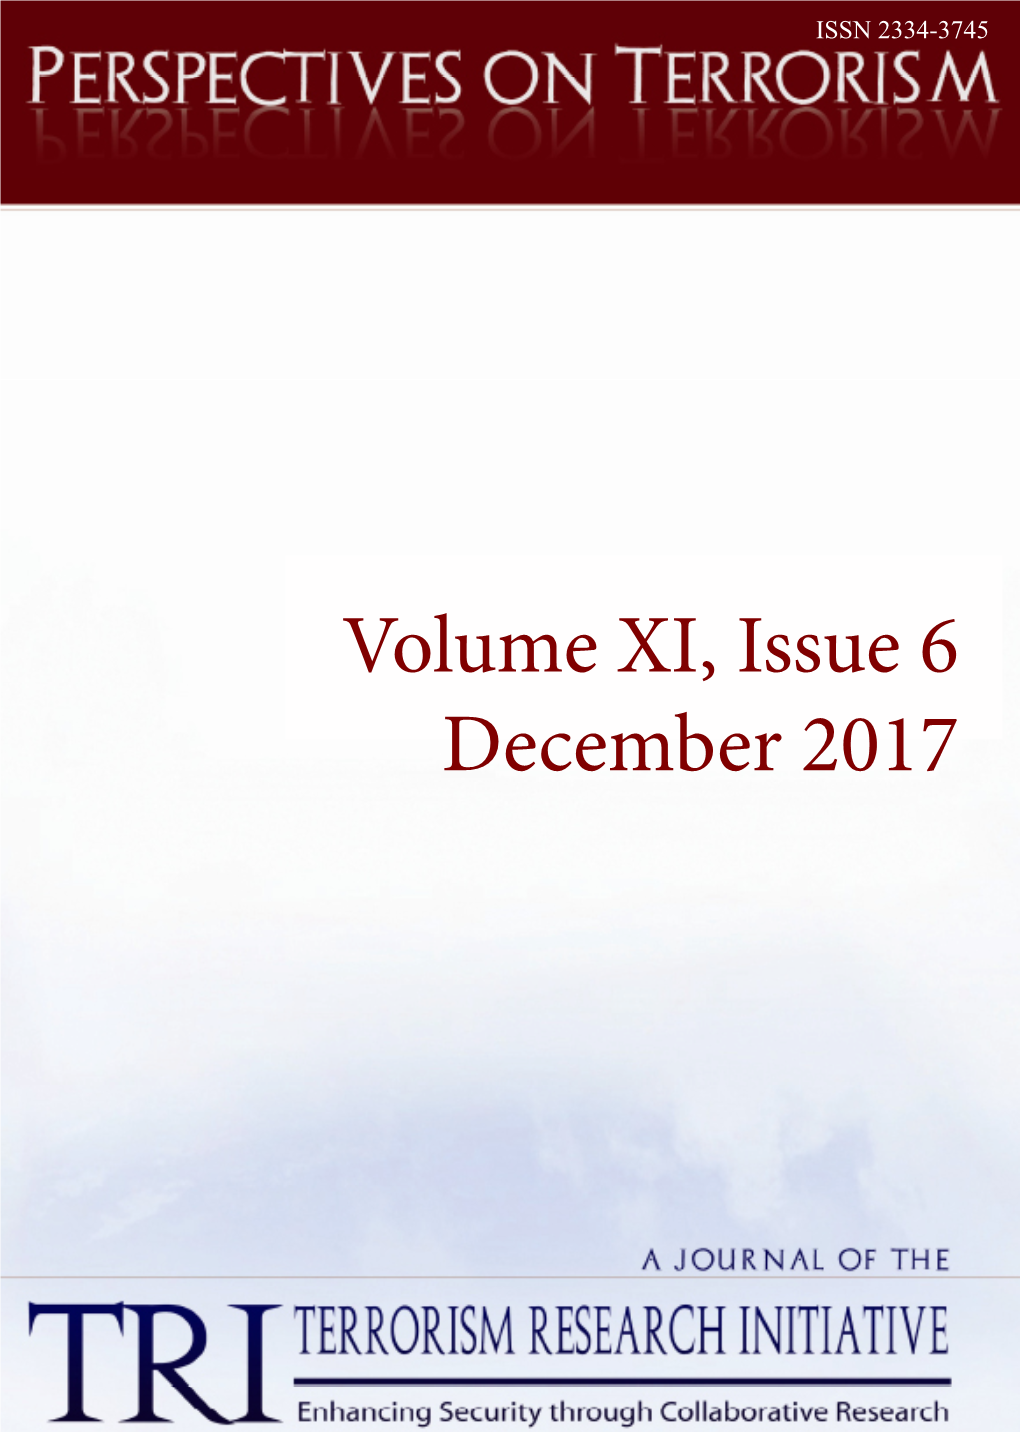 Volume XI, Issue 6 December 2017 PERSPECTIVES on TERRORISM Volume 11, Issue 6